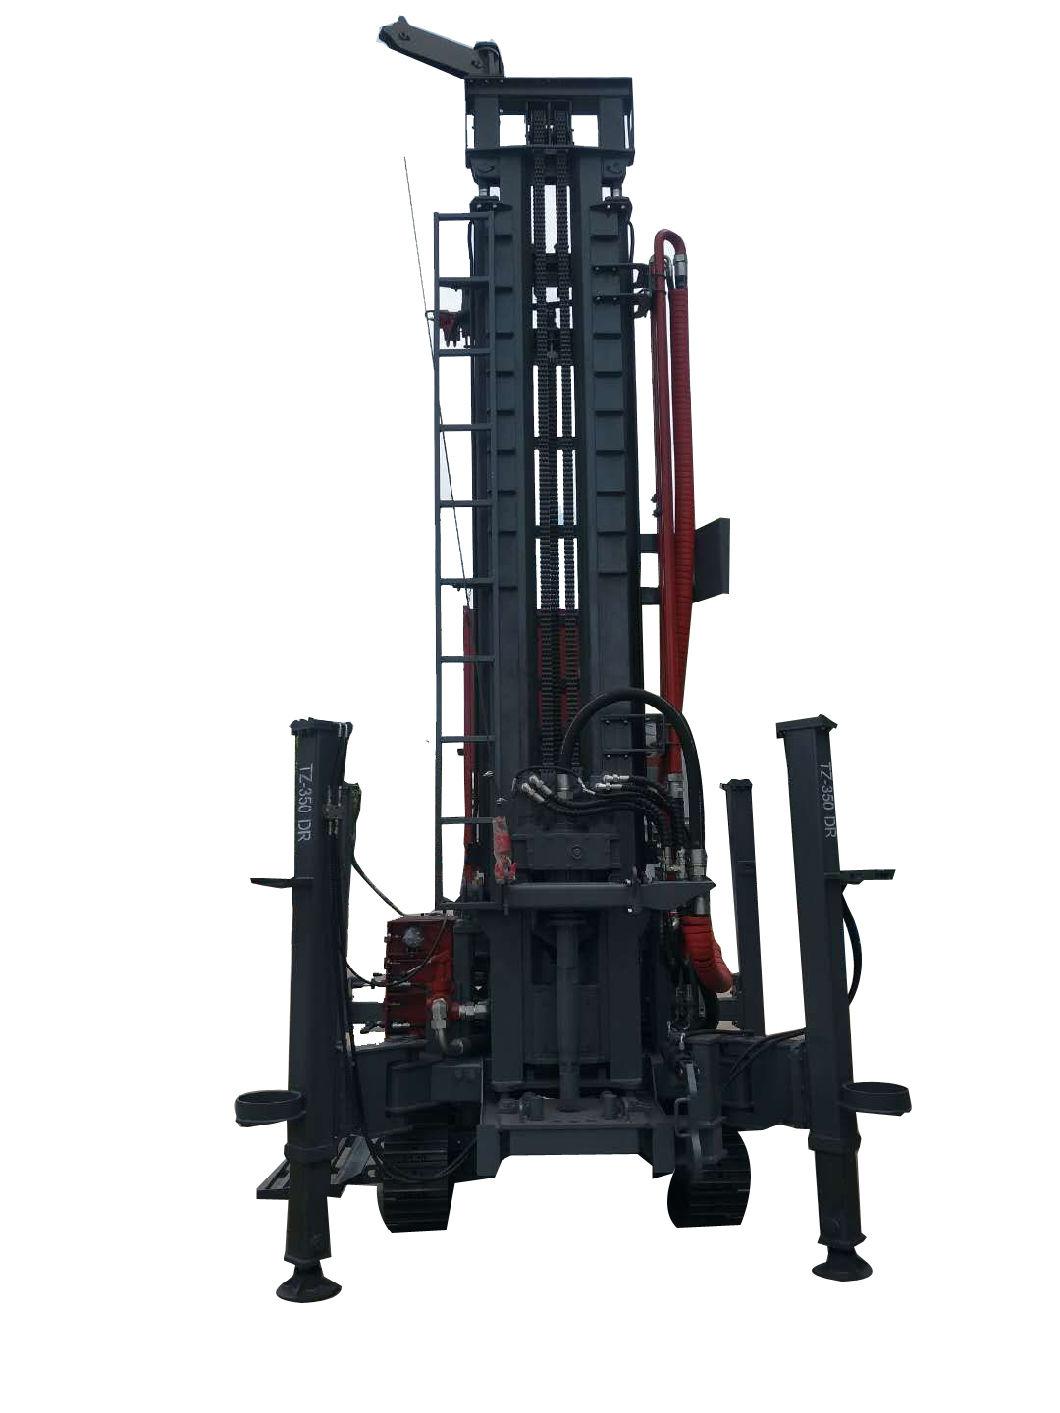 400m Top Hydraulic Drive Crawler Water Well Drilling Rig